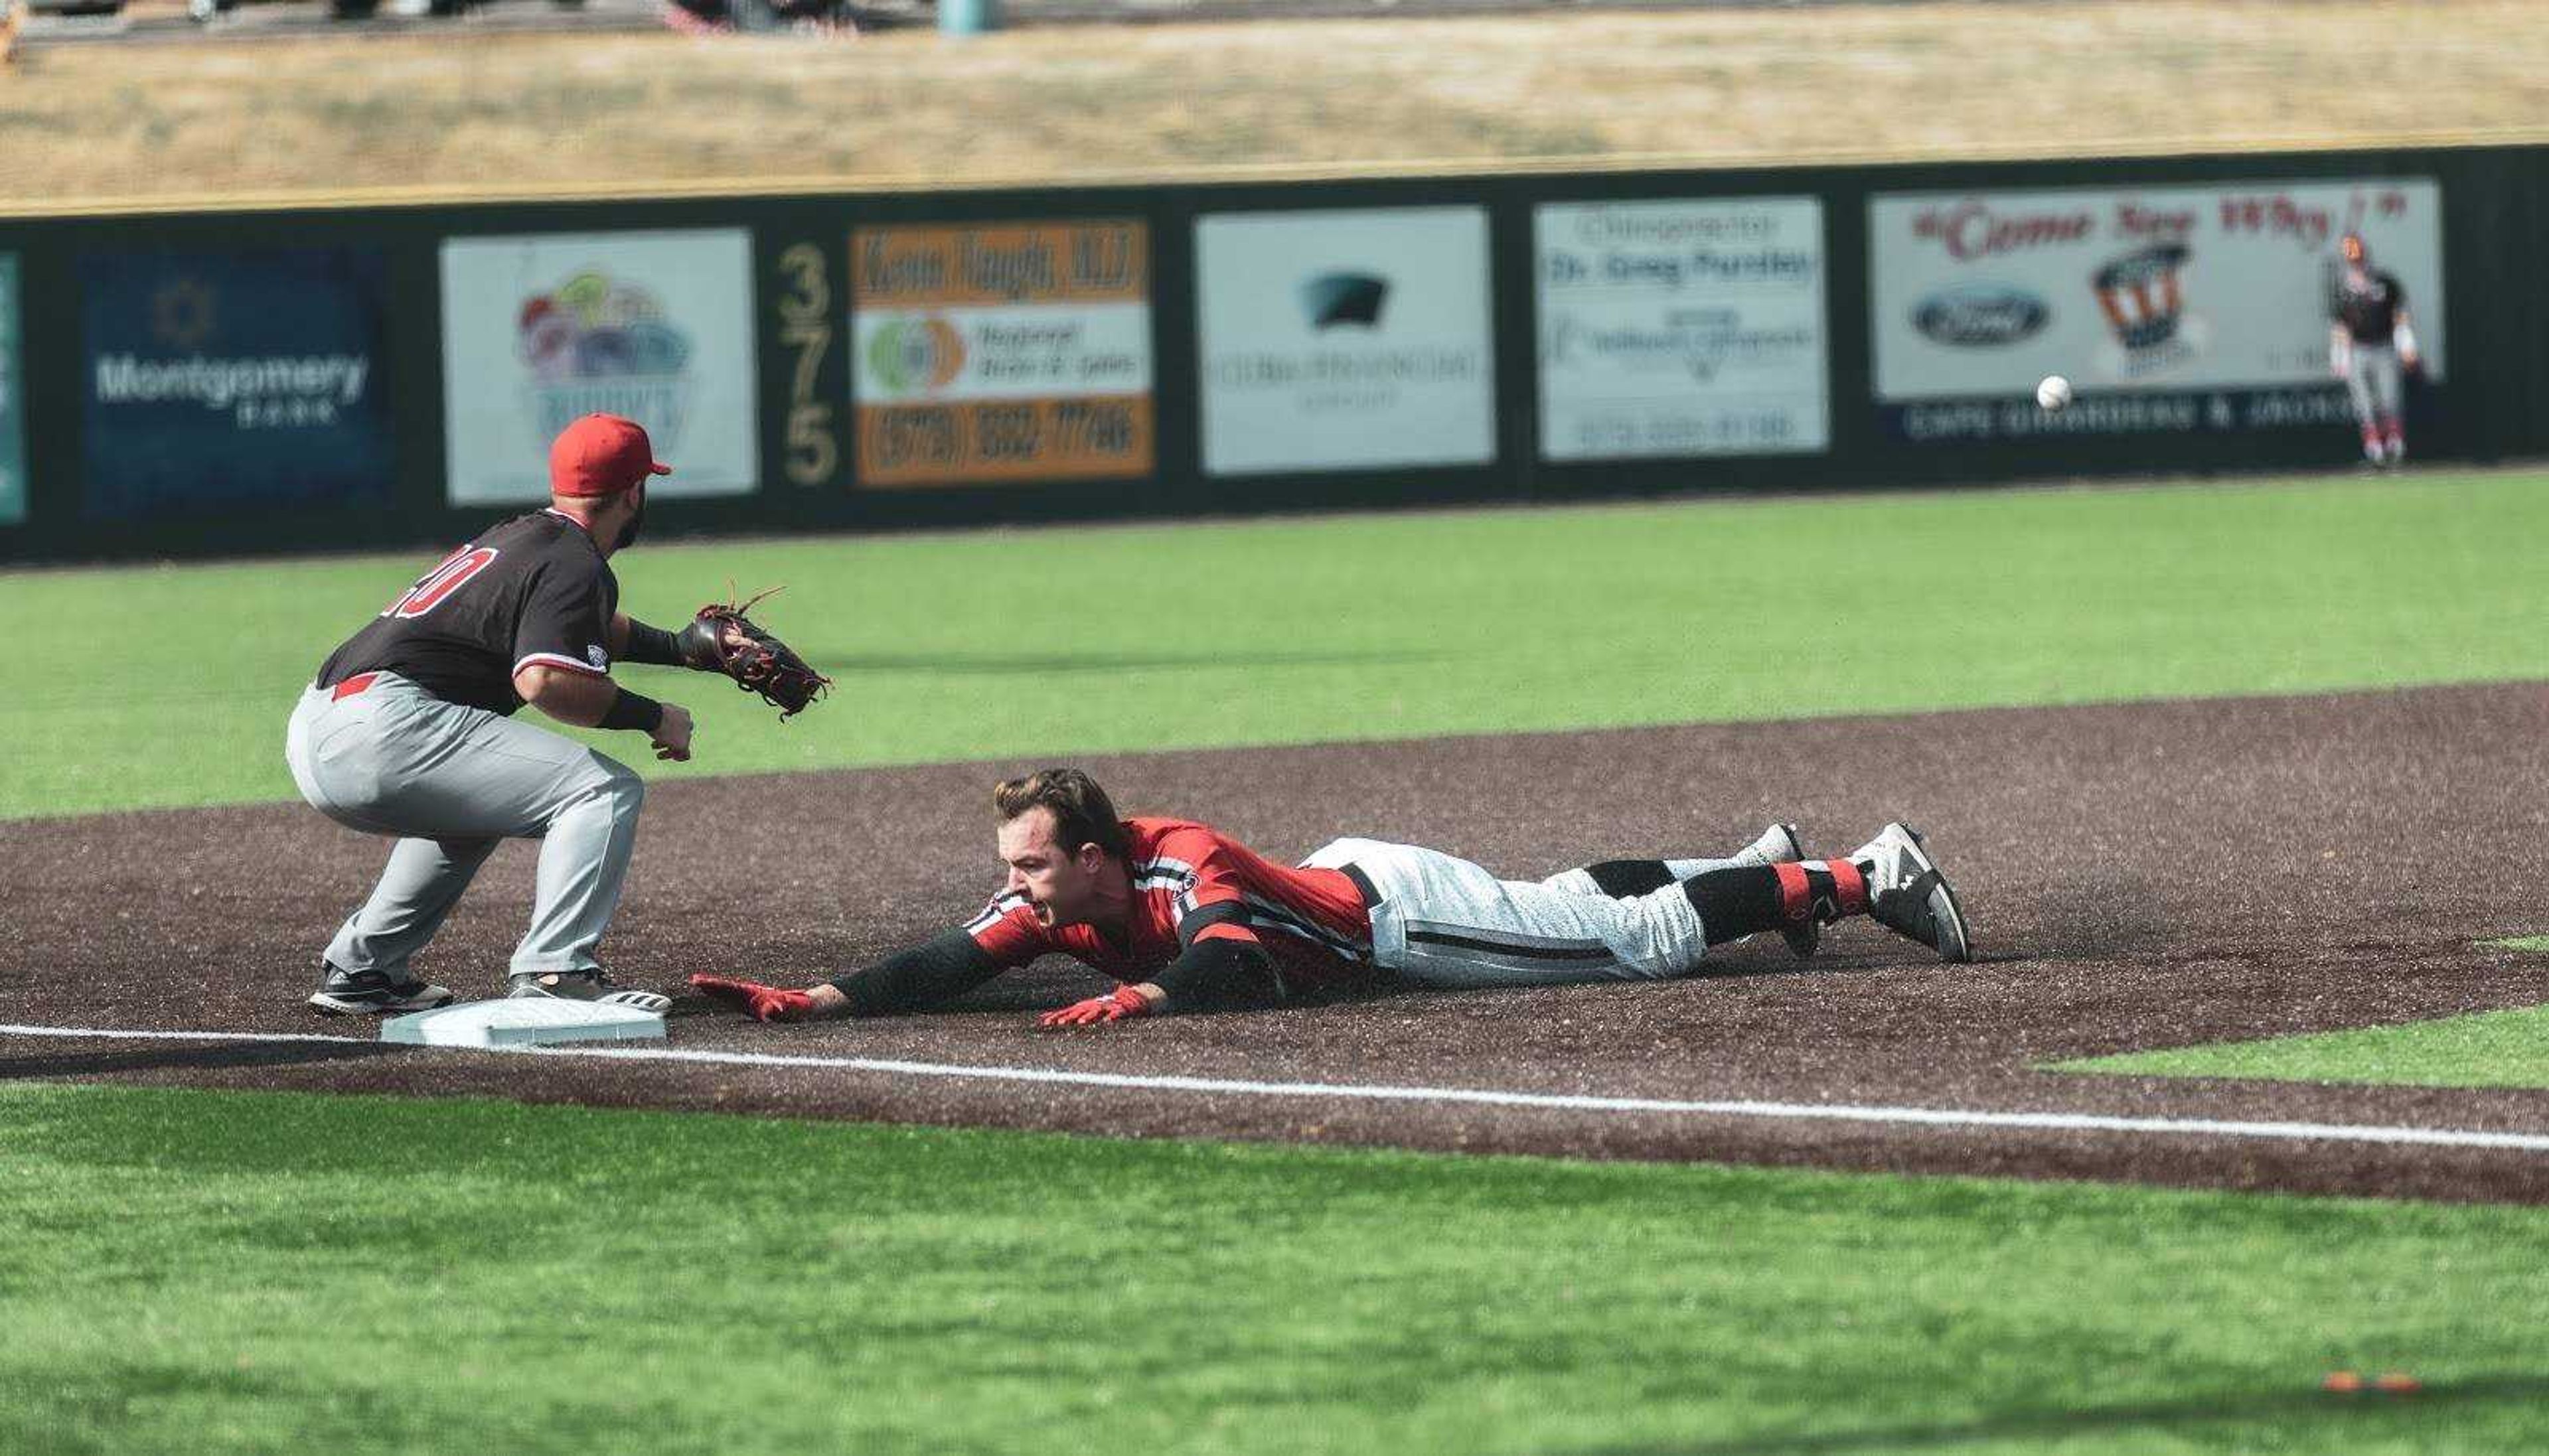 Senior Tyler Wilber slides into third base after his big hit in game 1 of the Redhawks double-header on Saturday, Feb. 22.